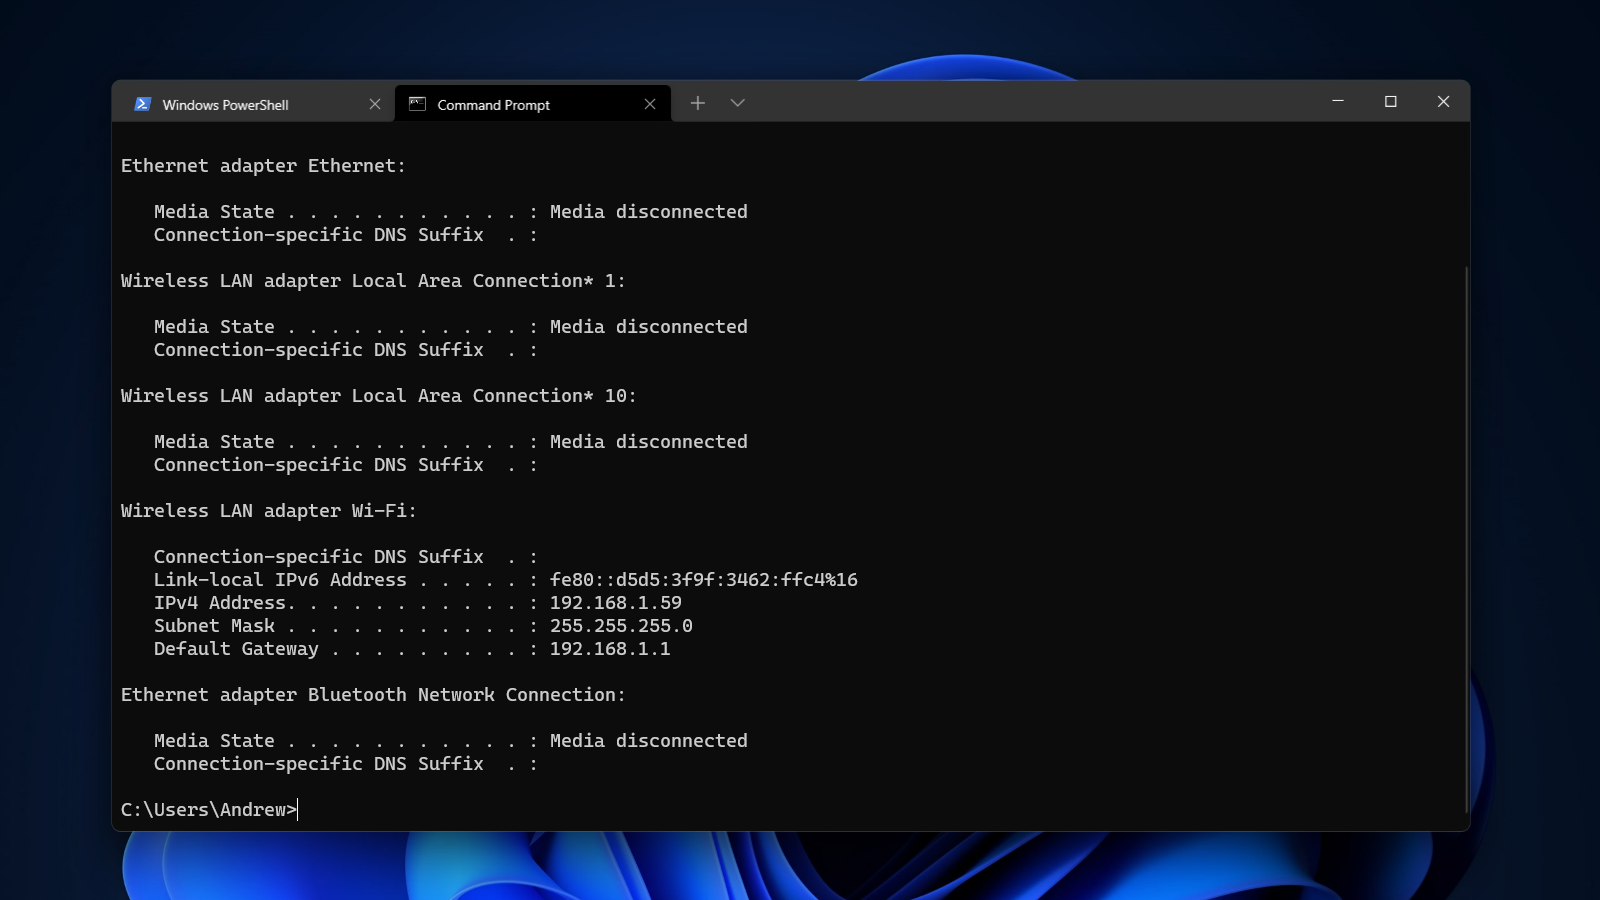 Windows Terminal is now the default command-line interface in Windows 11. It can handle Powershell, Command Prompt, and WSL commands, among others.